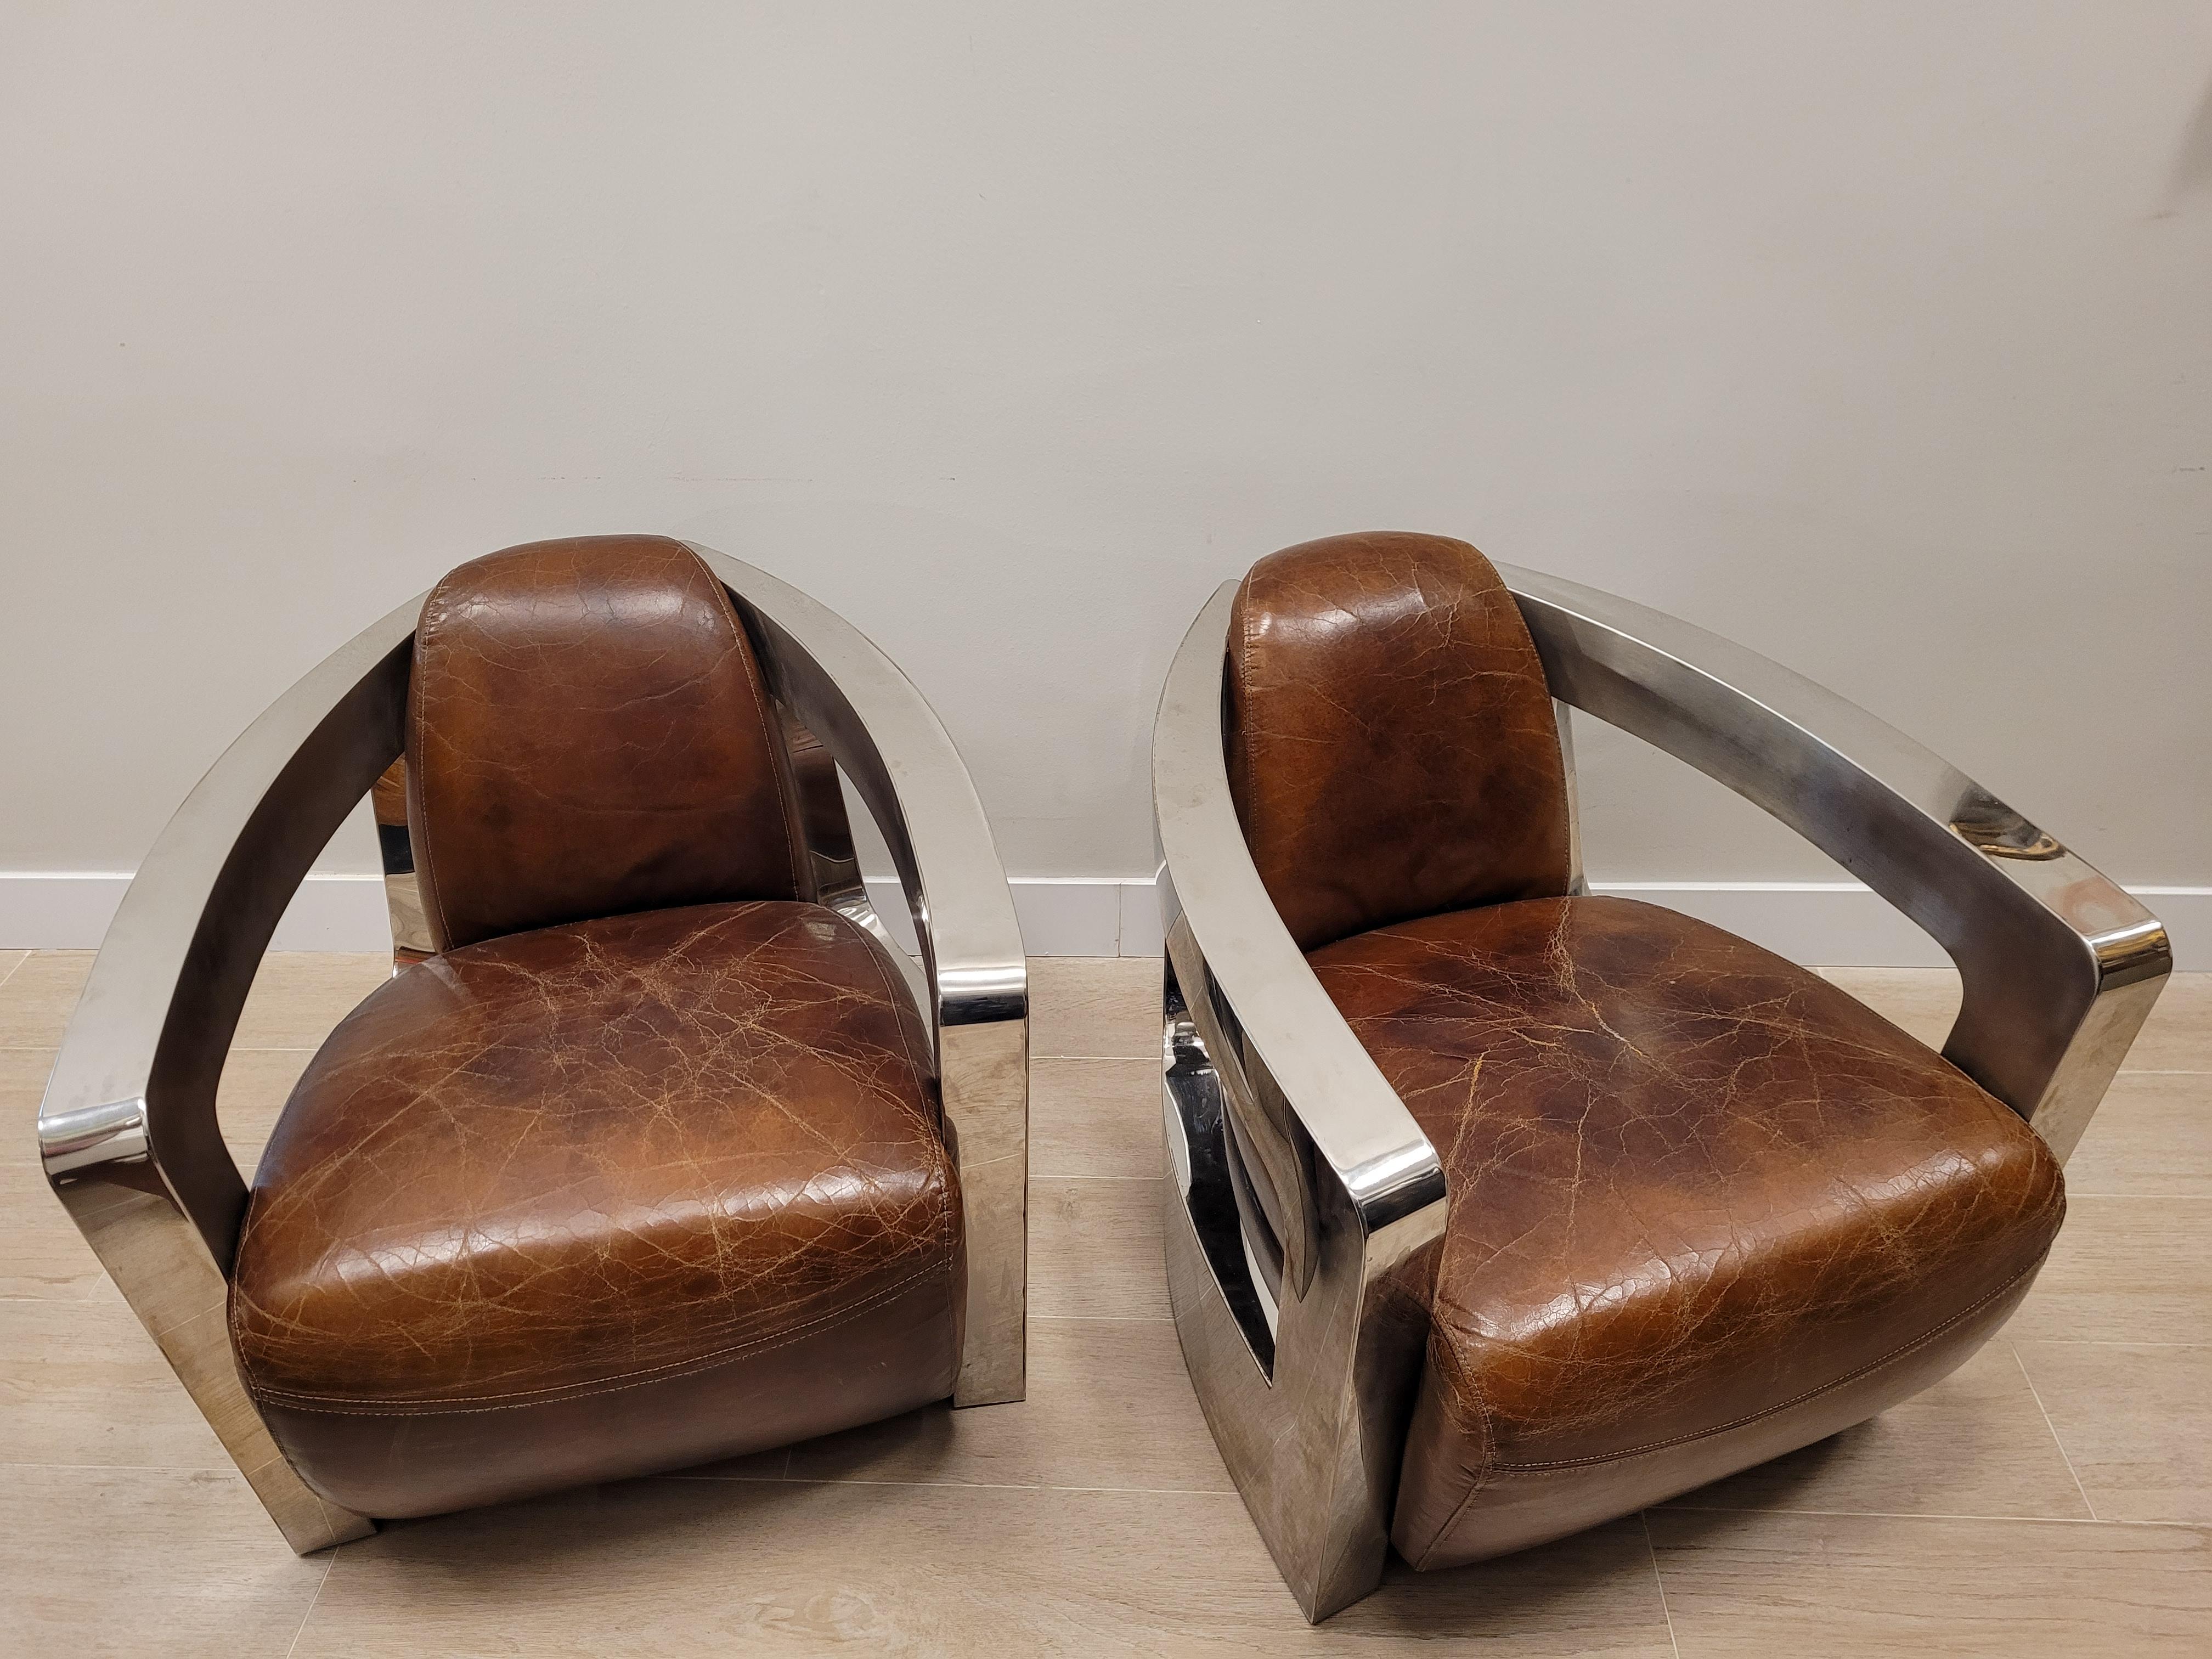 Gorgeous and one of a kind pair of Art Deco style aviator club chair in Classic look with steel and cognac leather. Very comfortable to sit in, very men's club/lounge meets Streamline Modern.
The Aviator Wood and Leather Chair draws its inspiration